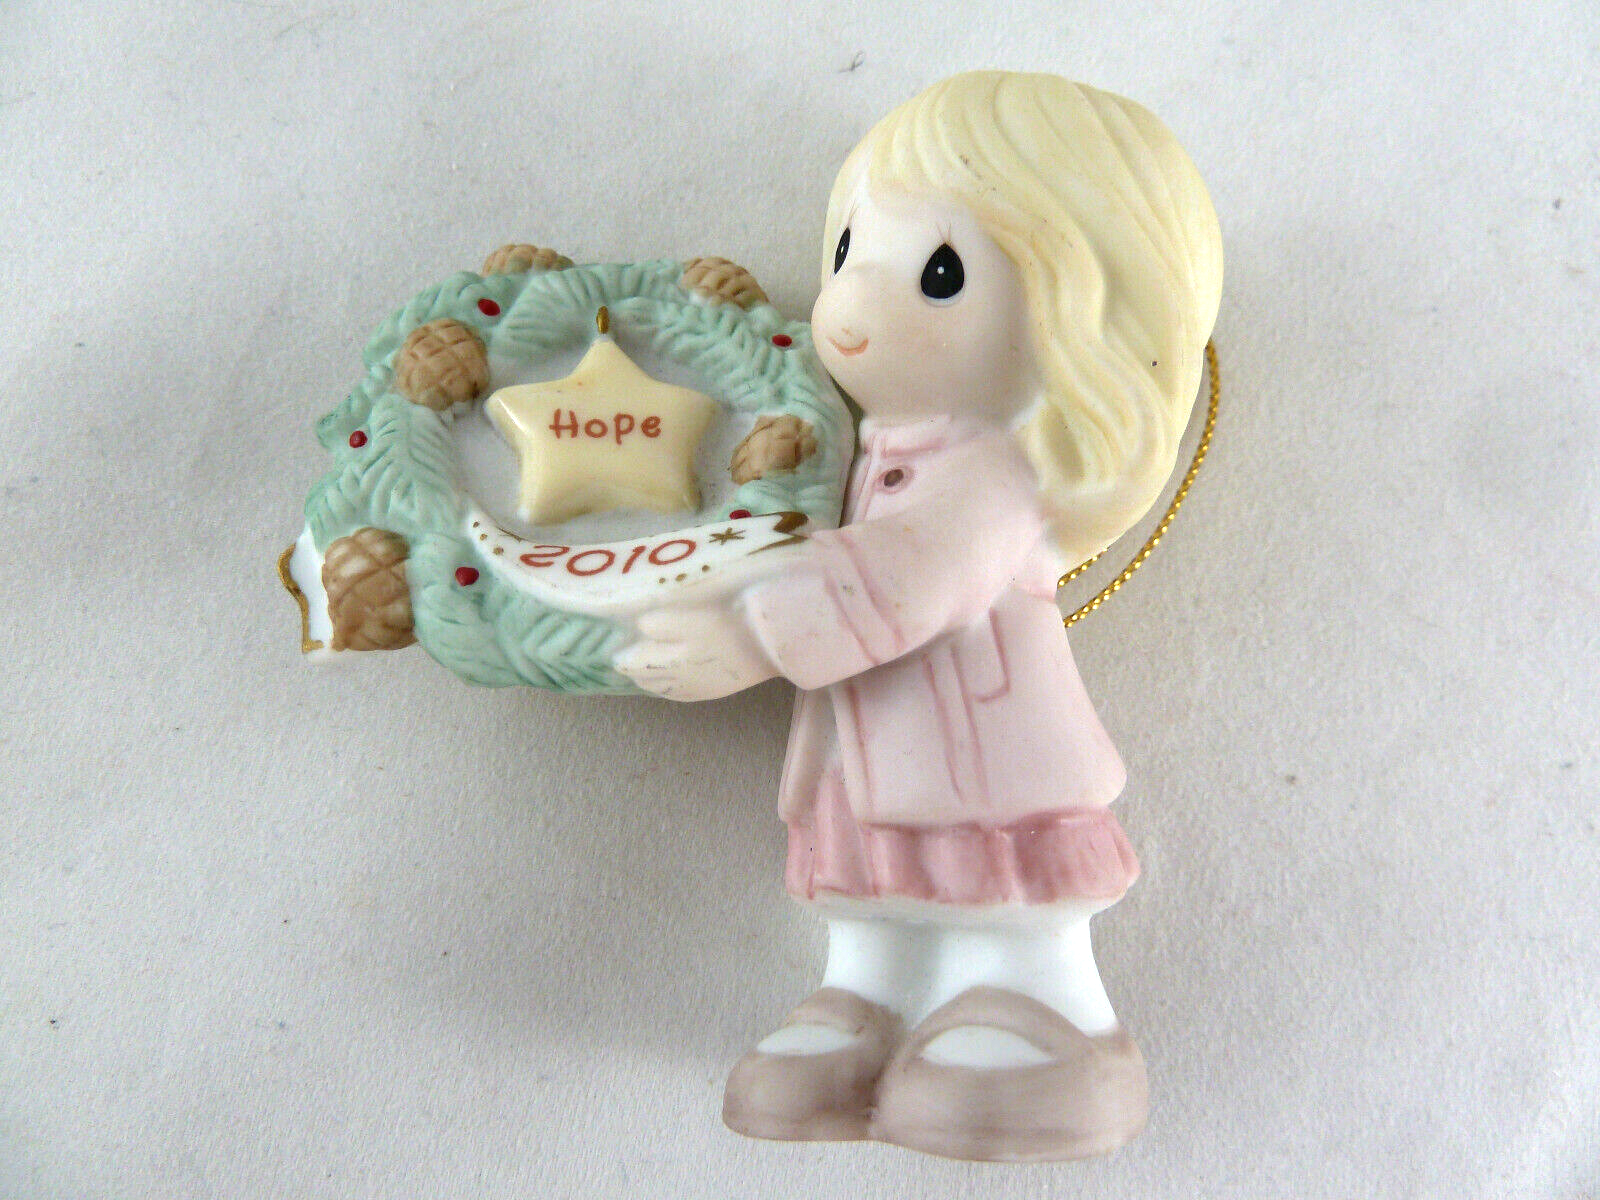 Precious Moments 2010 Annual Ornament Girl Holding Wreath My Hope Is In You 3.5" - $10.88